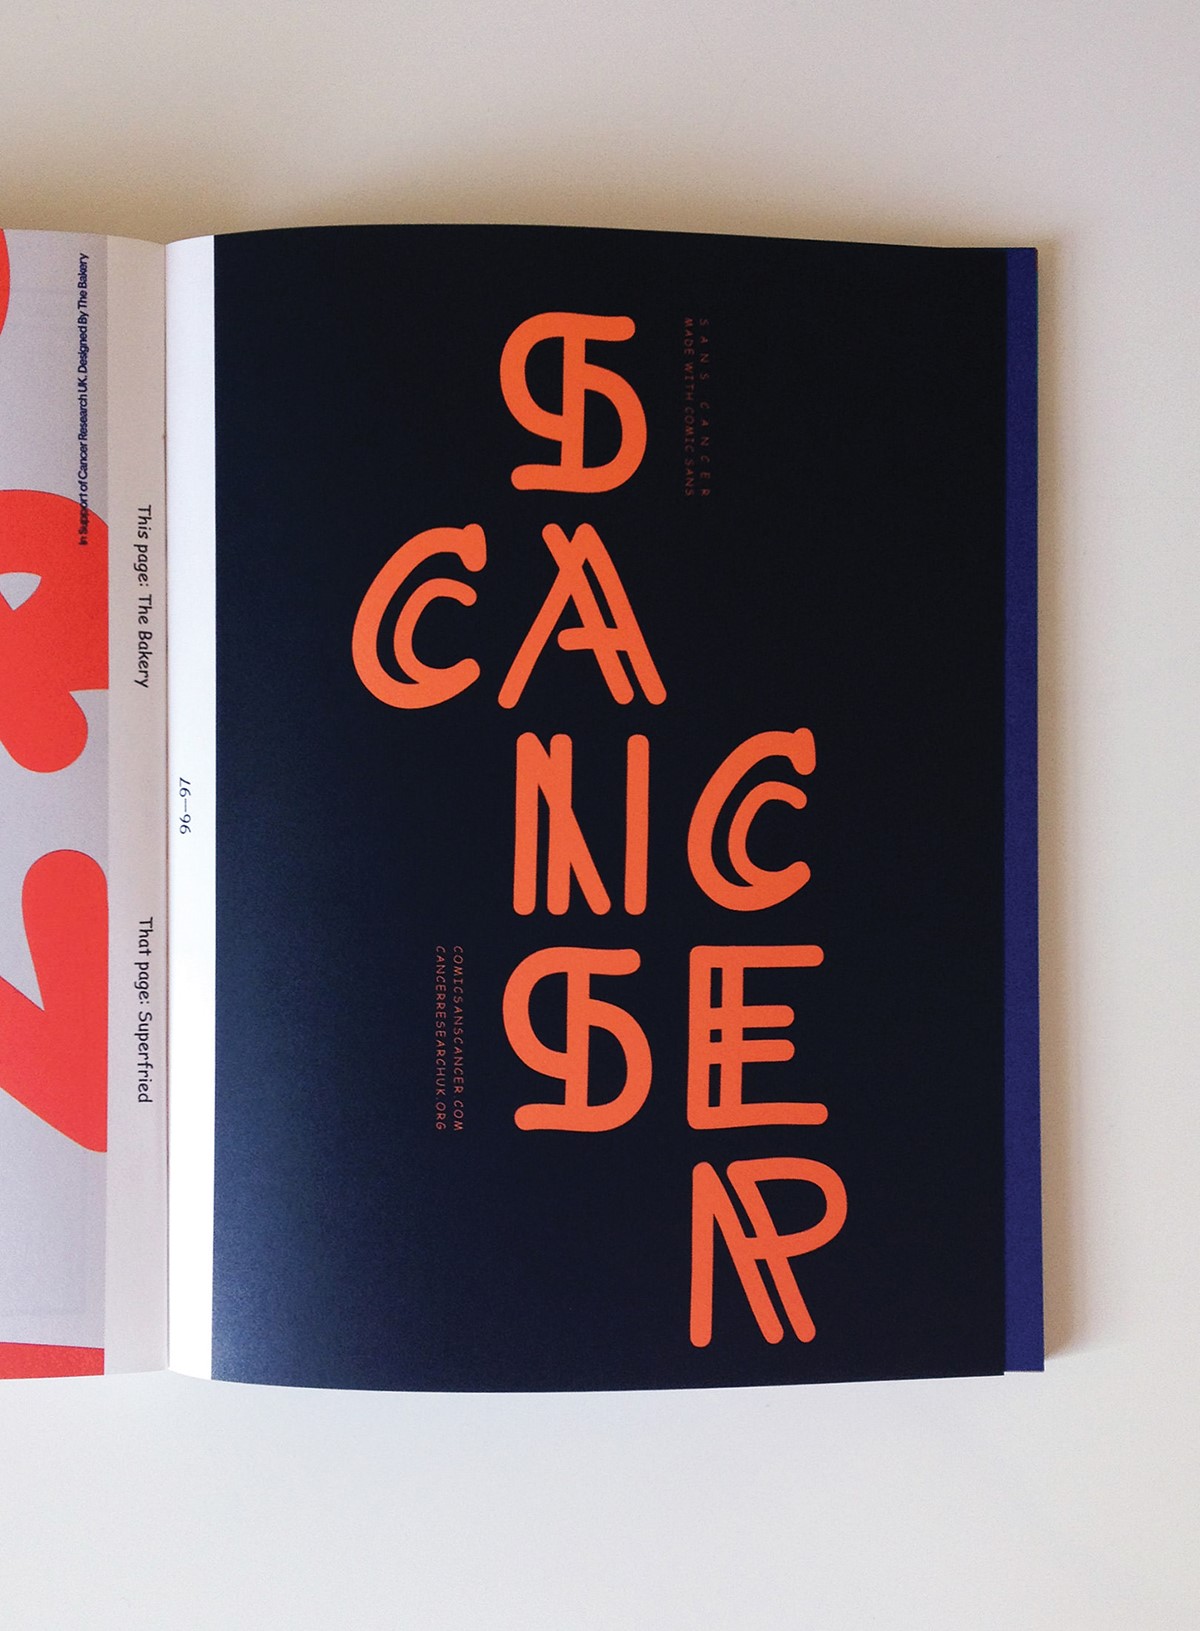 Comic Sans for Cancer. Charity exhibition book. Submission by Superfried.